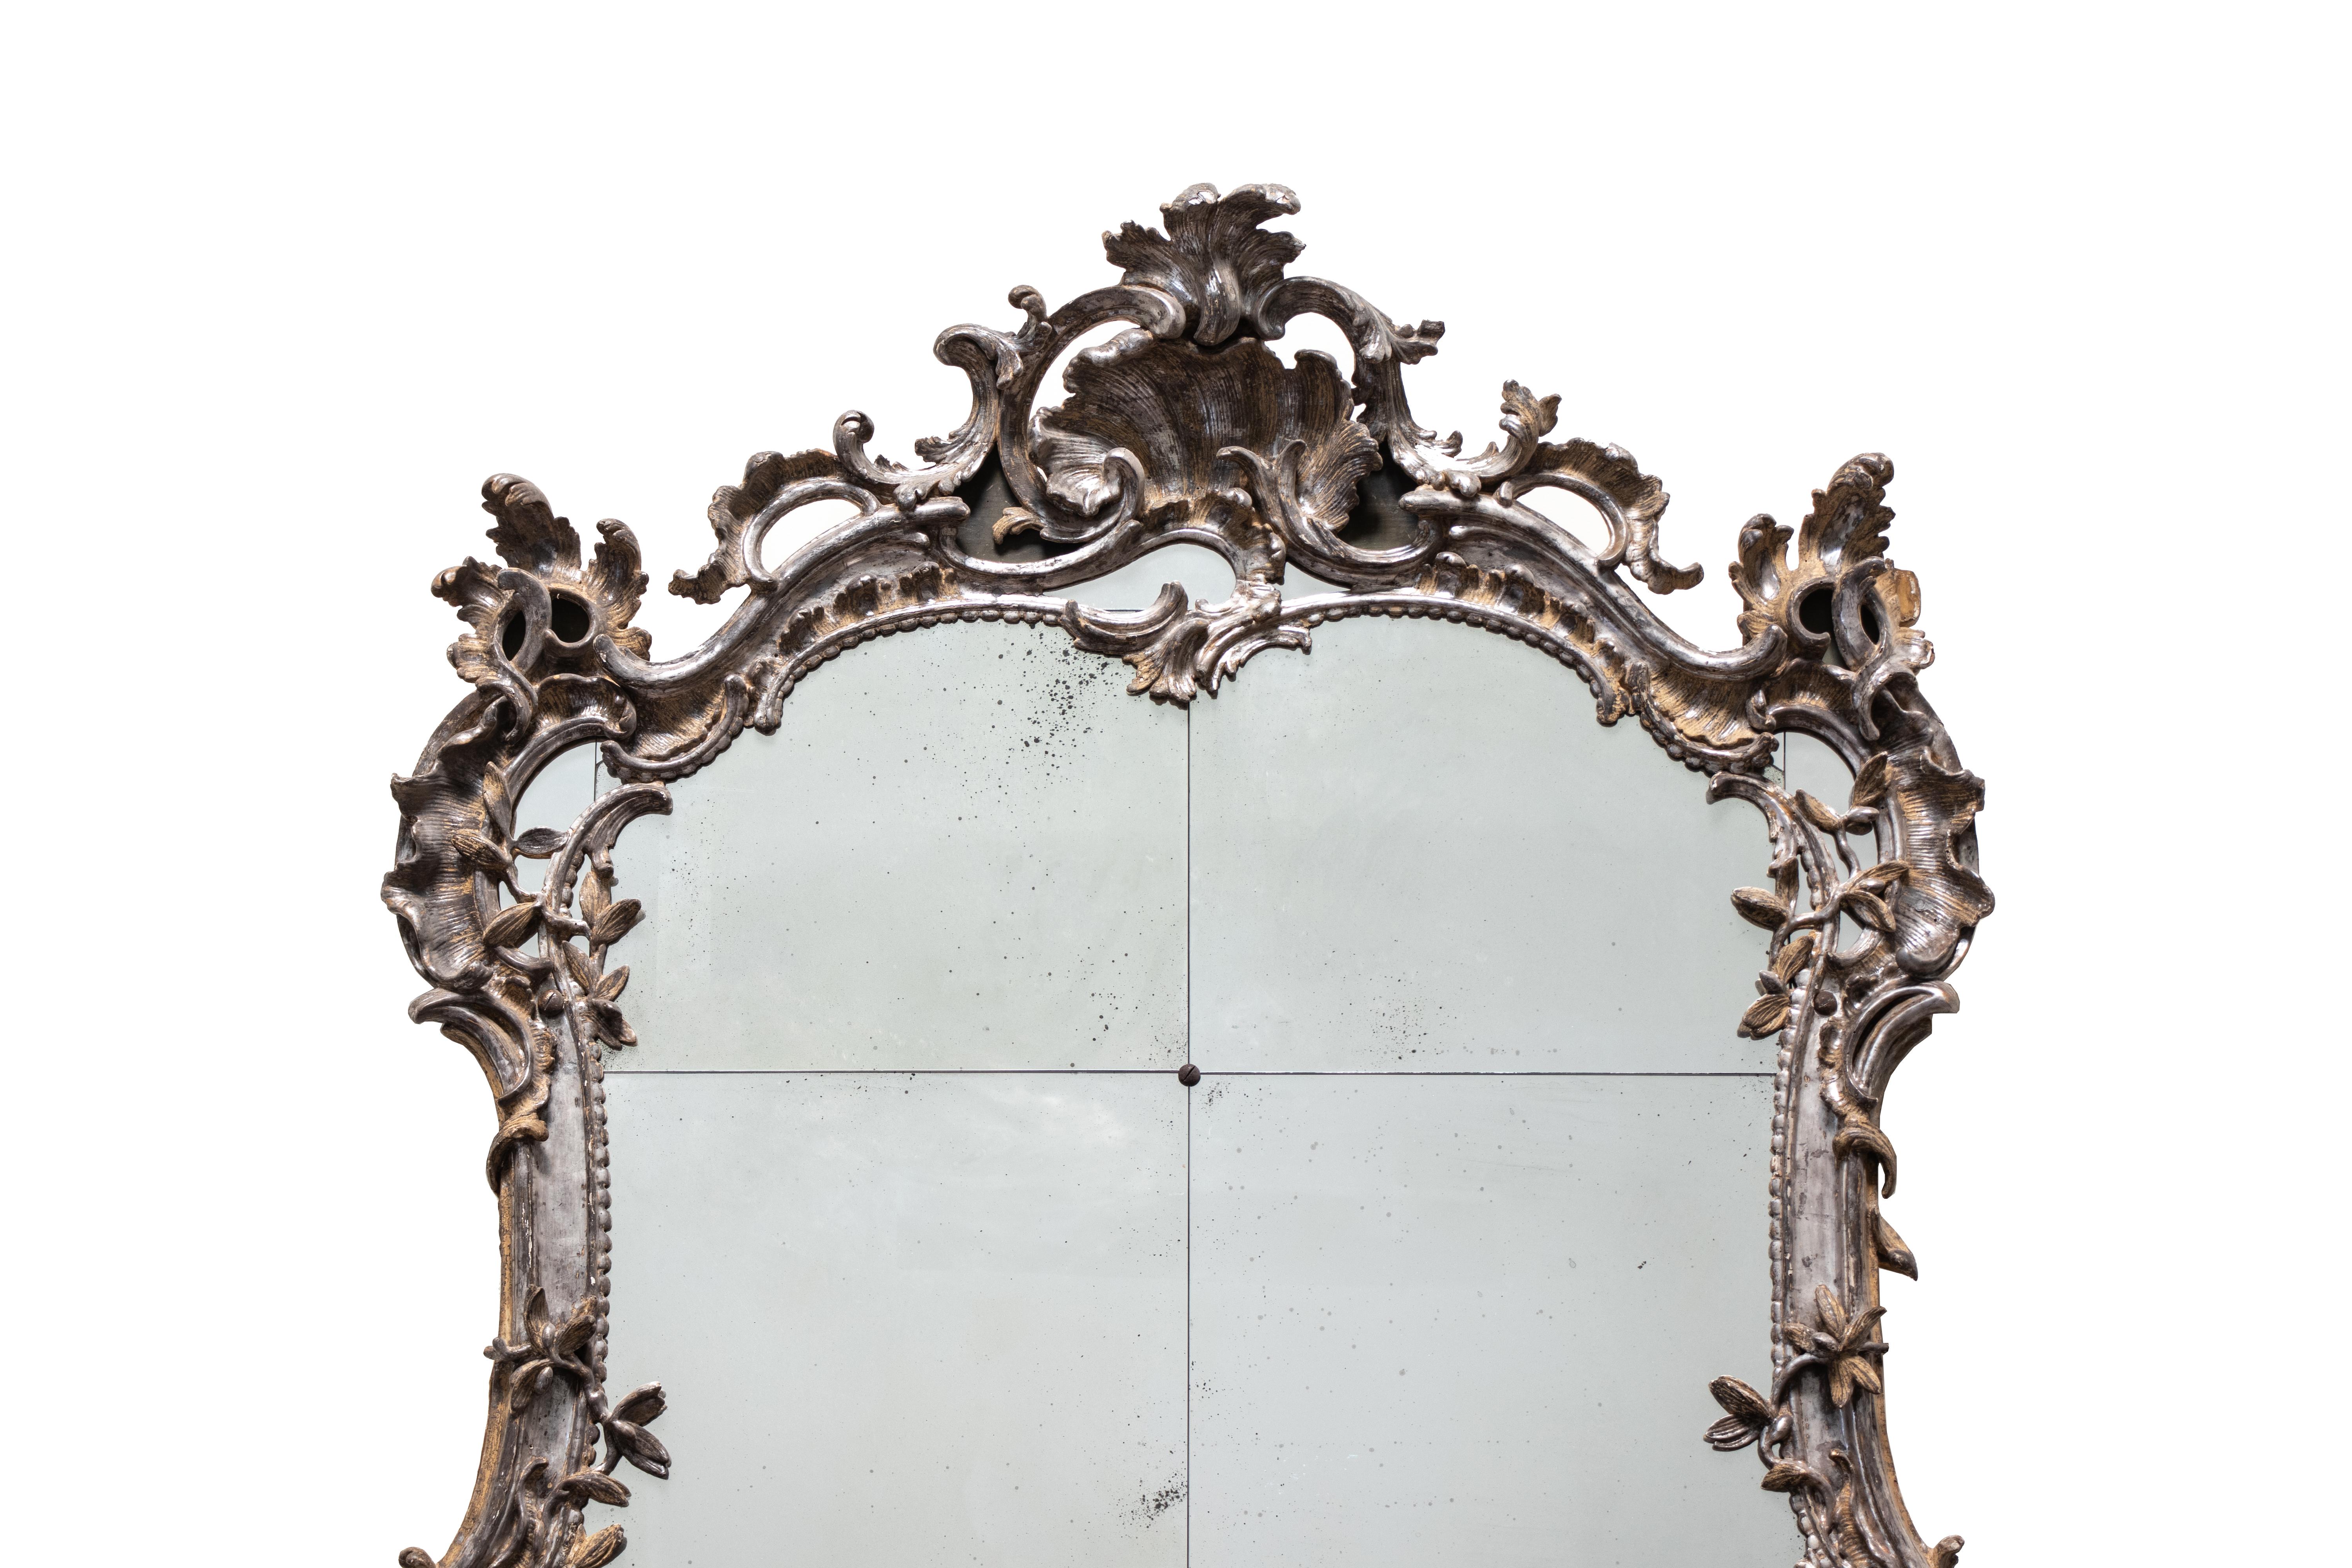 A grand-scale wall or console mirror in Rococo style from mid-18th century South Germany. It features six mirror panels framed in richly decorated silvered wood, carved in the shapes of rocaille scrolls and foliage, with two dragon figures at the